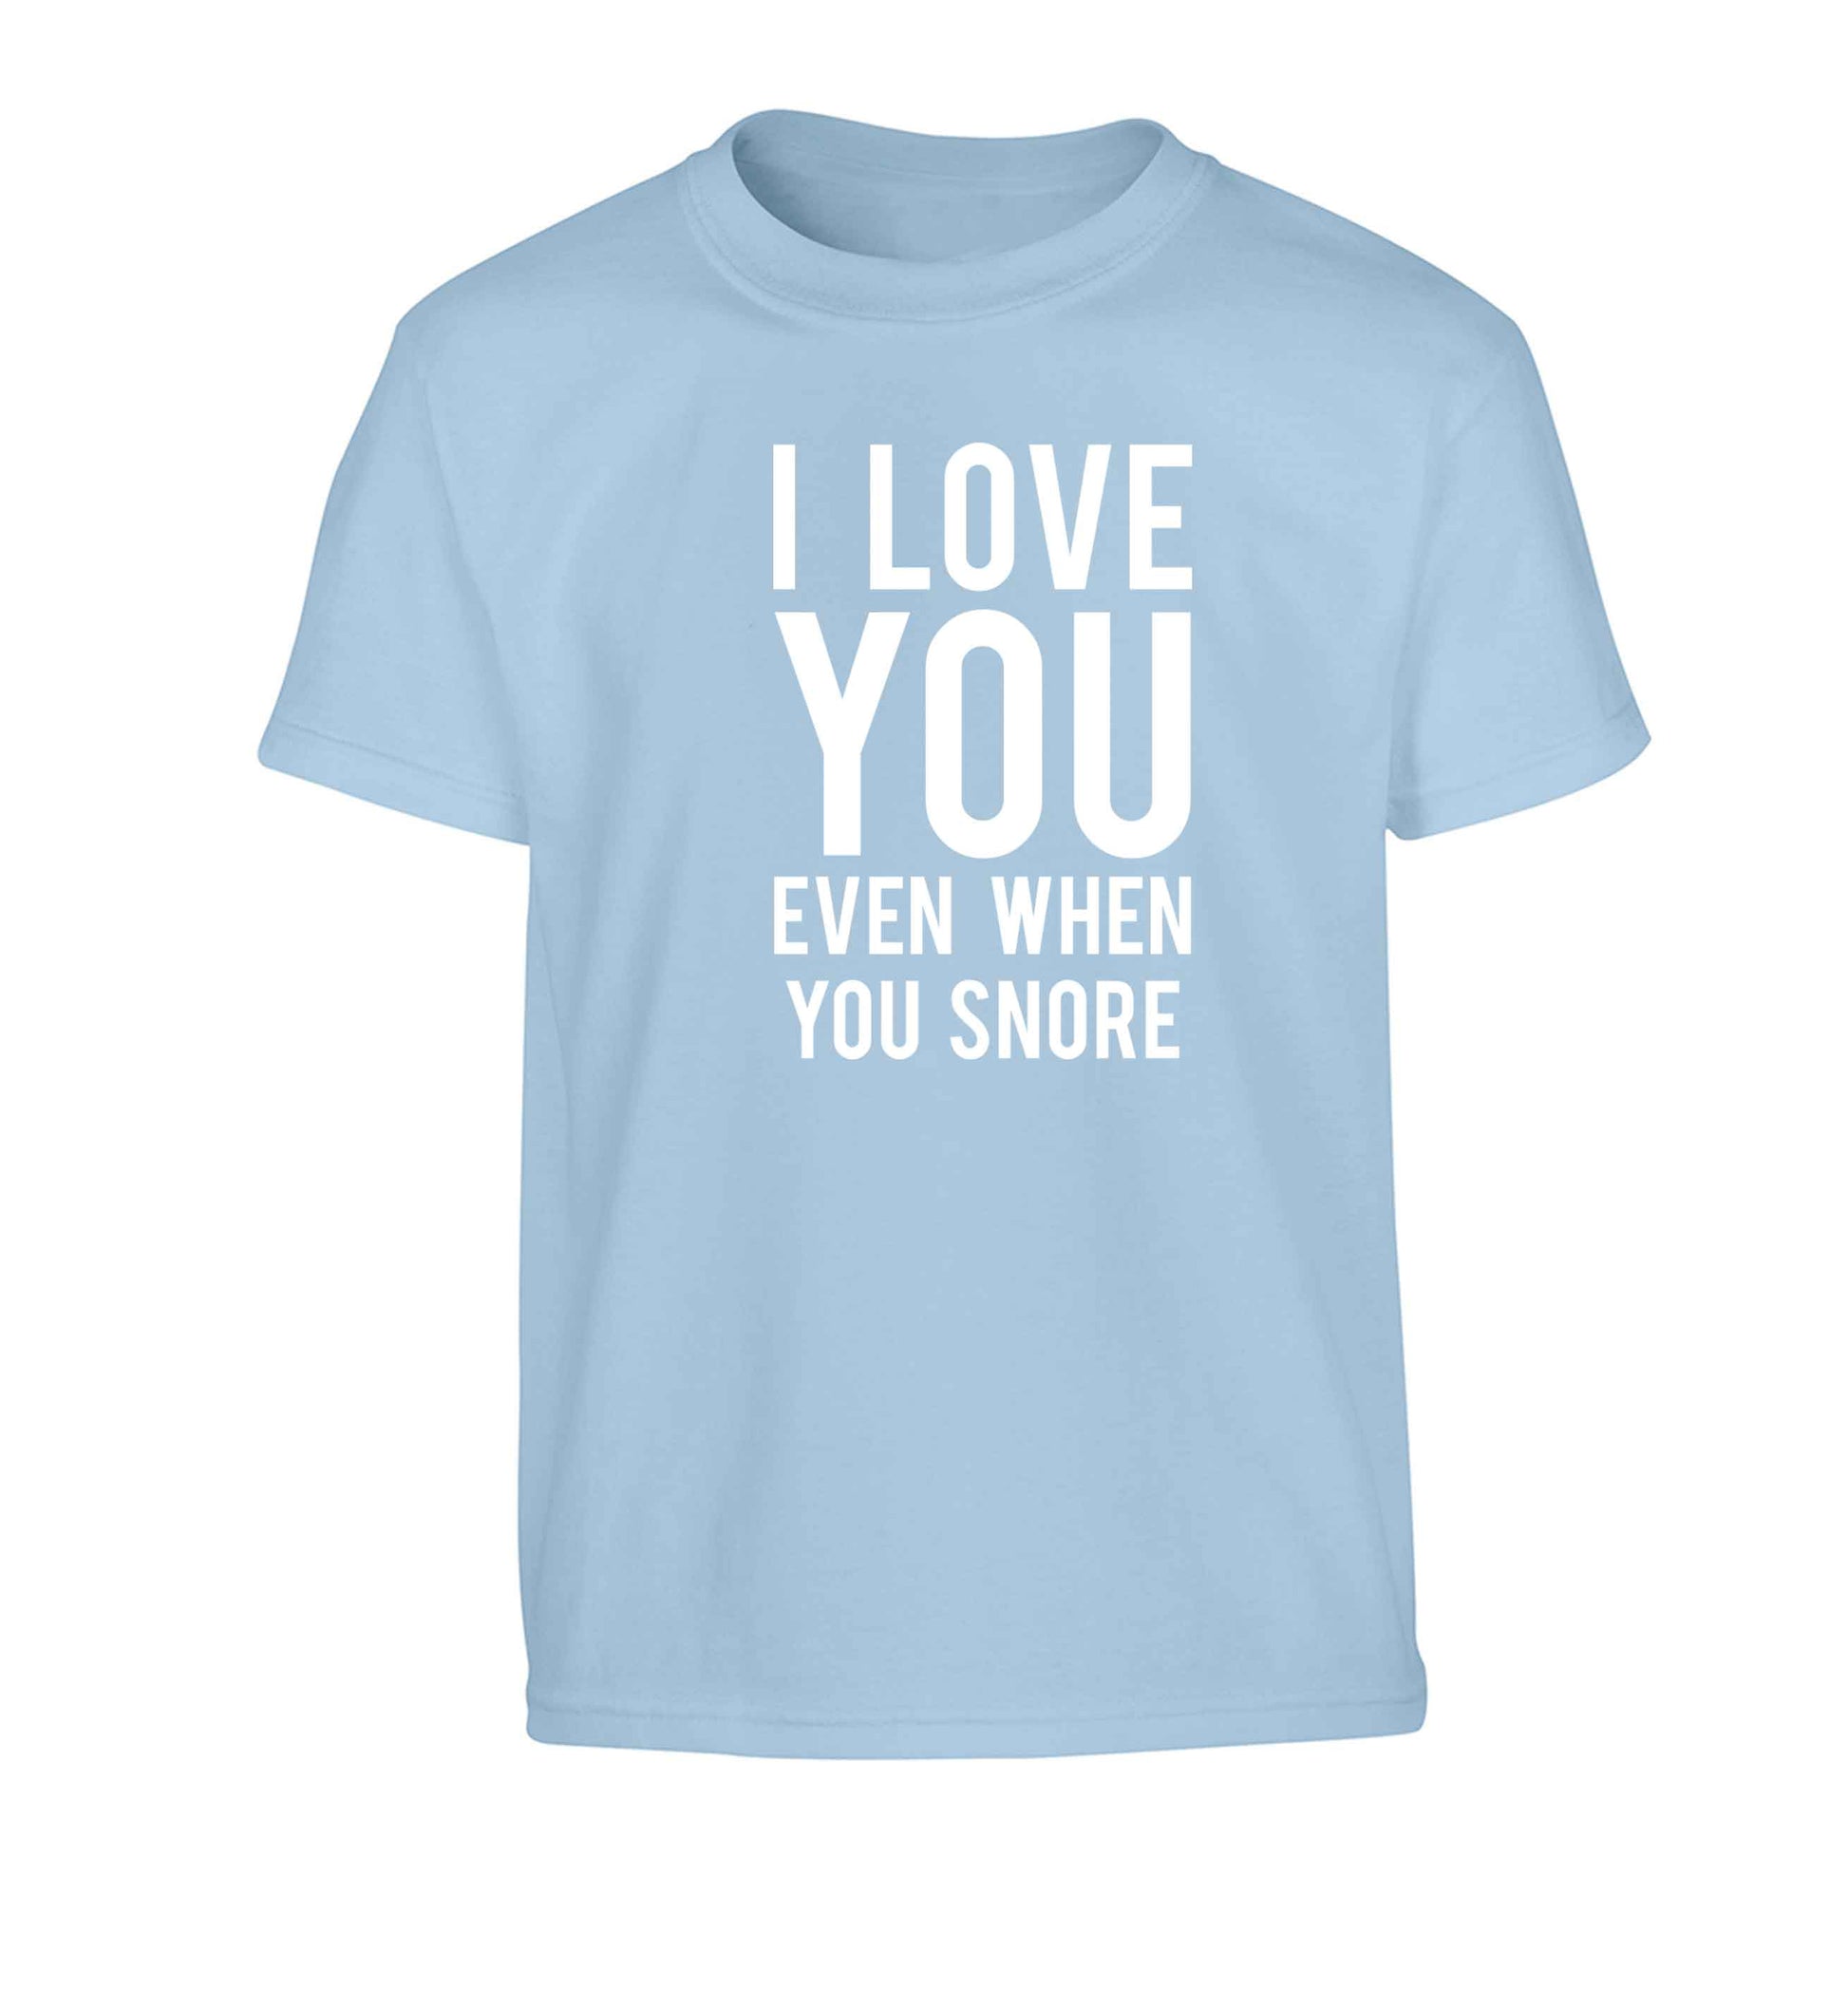 I love you even when you snore Children's light blue Tshirt 12-13 Years